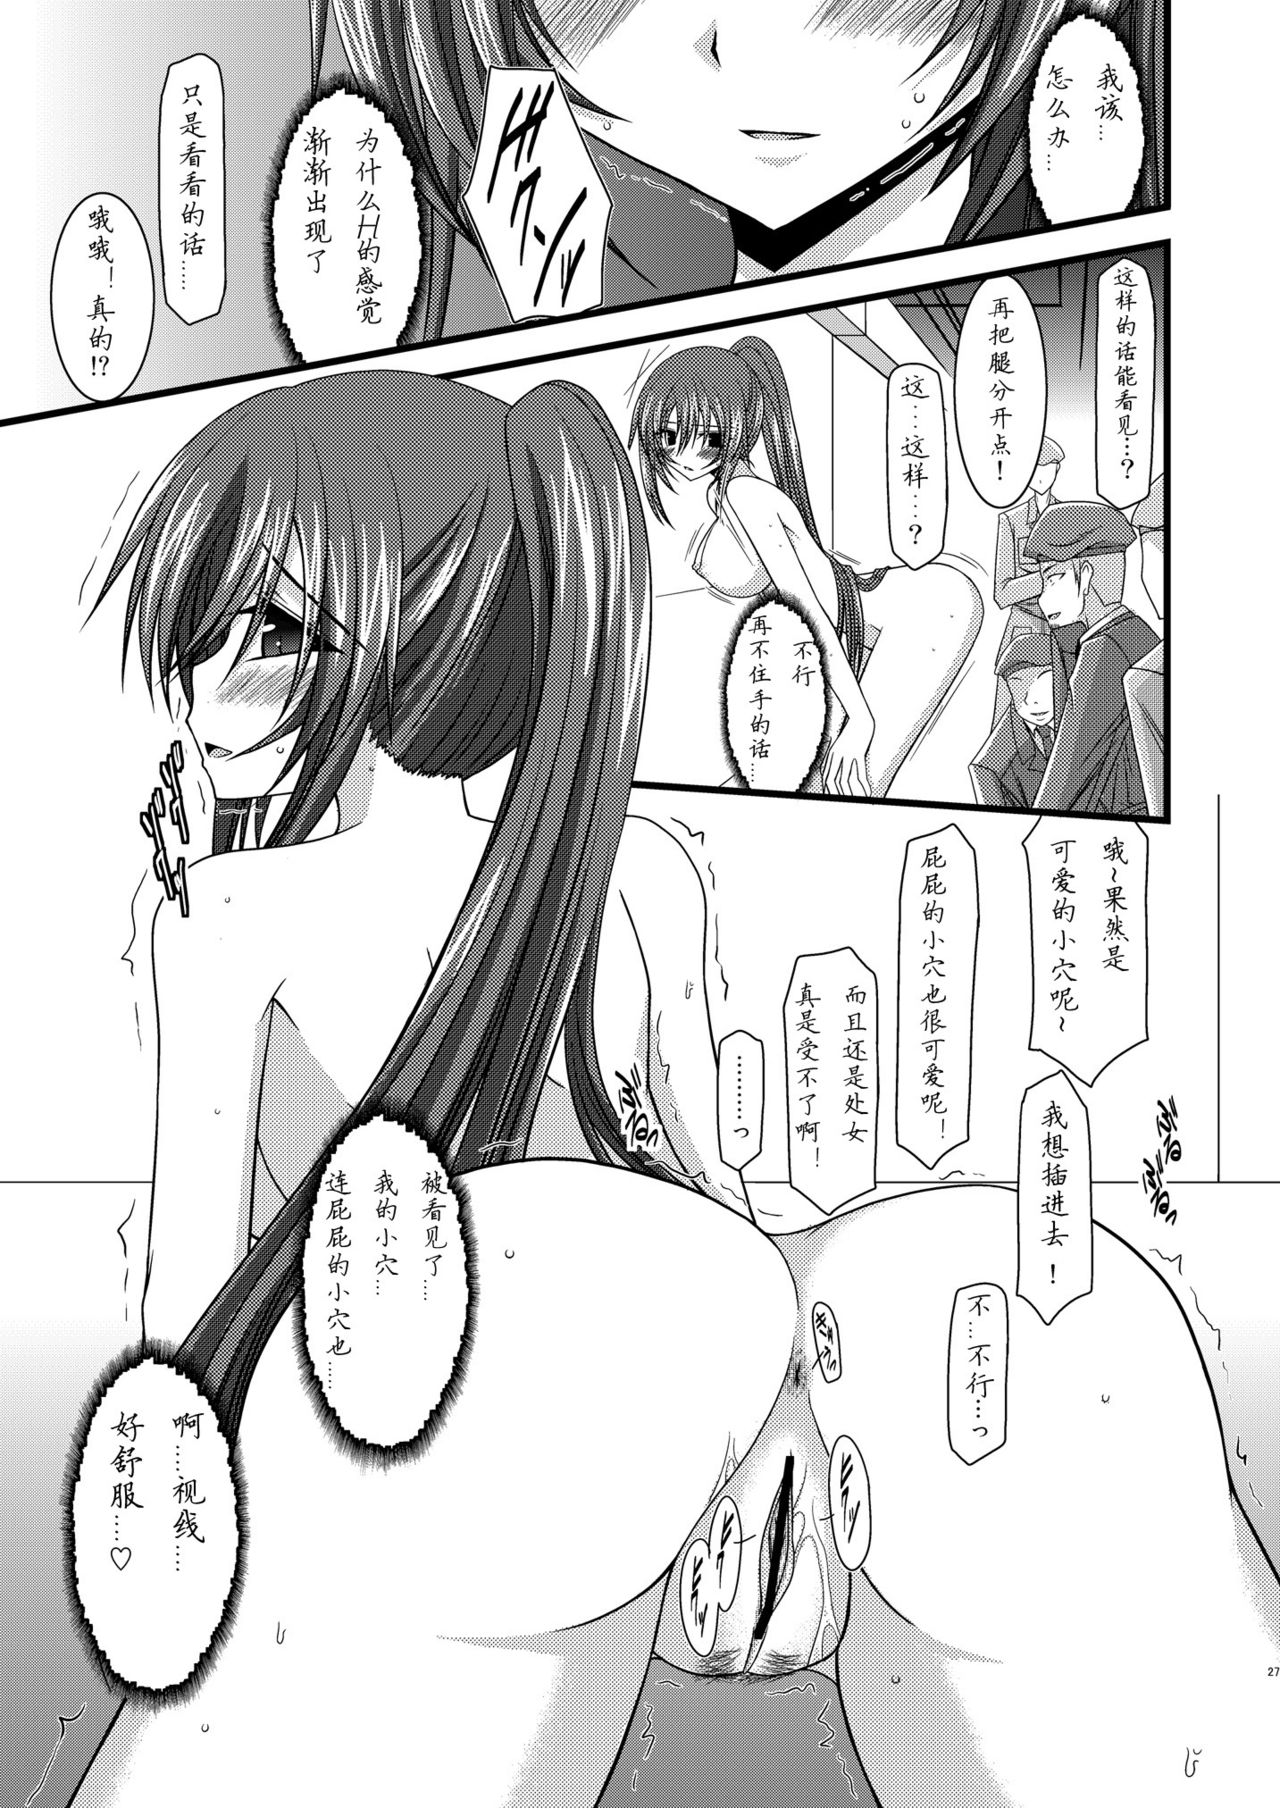 (COMIC1☆3) [valssu (Charu)] ANOTHER OCEAN (Star Ocean 4) [Chinese] page 26 full